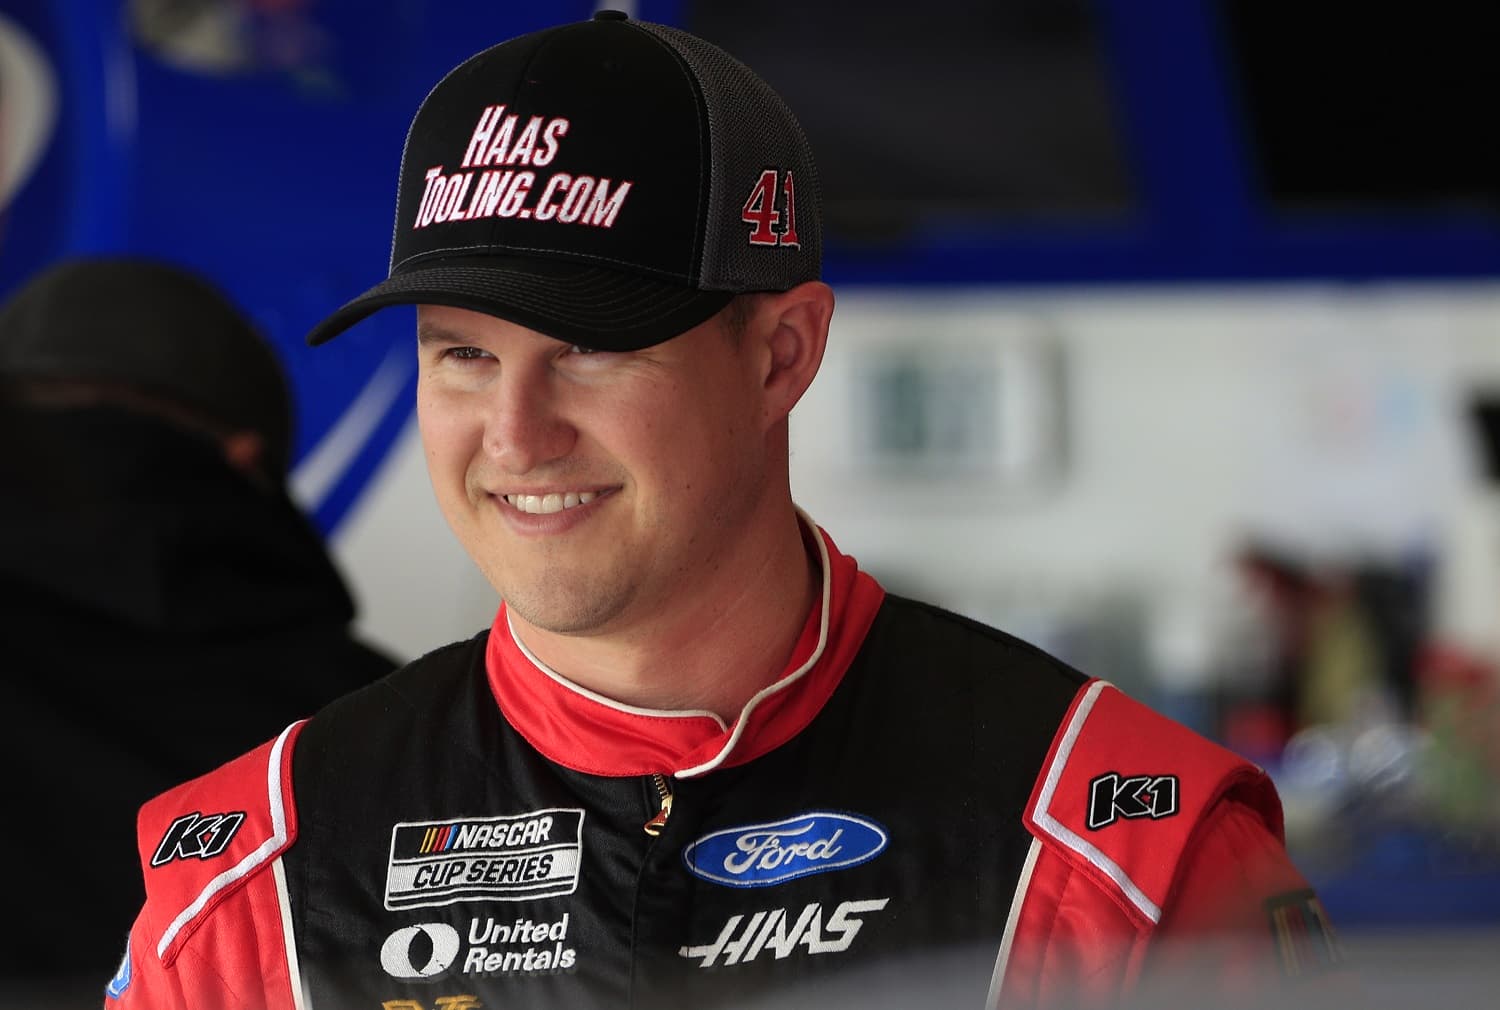 Ryan Preece talks with his crew during practice for the Daytona 500 on Feb. 18, 2023, at Daytona International Speedway. | Jeff Robinson/Icon Sportswire via Getty Images